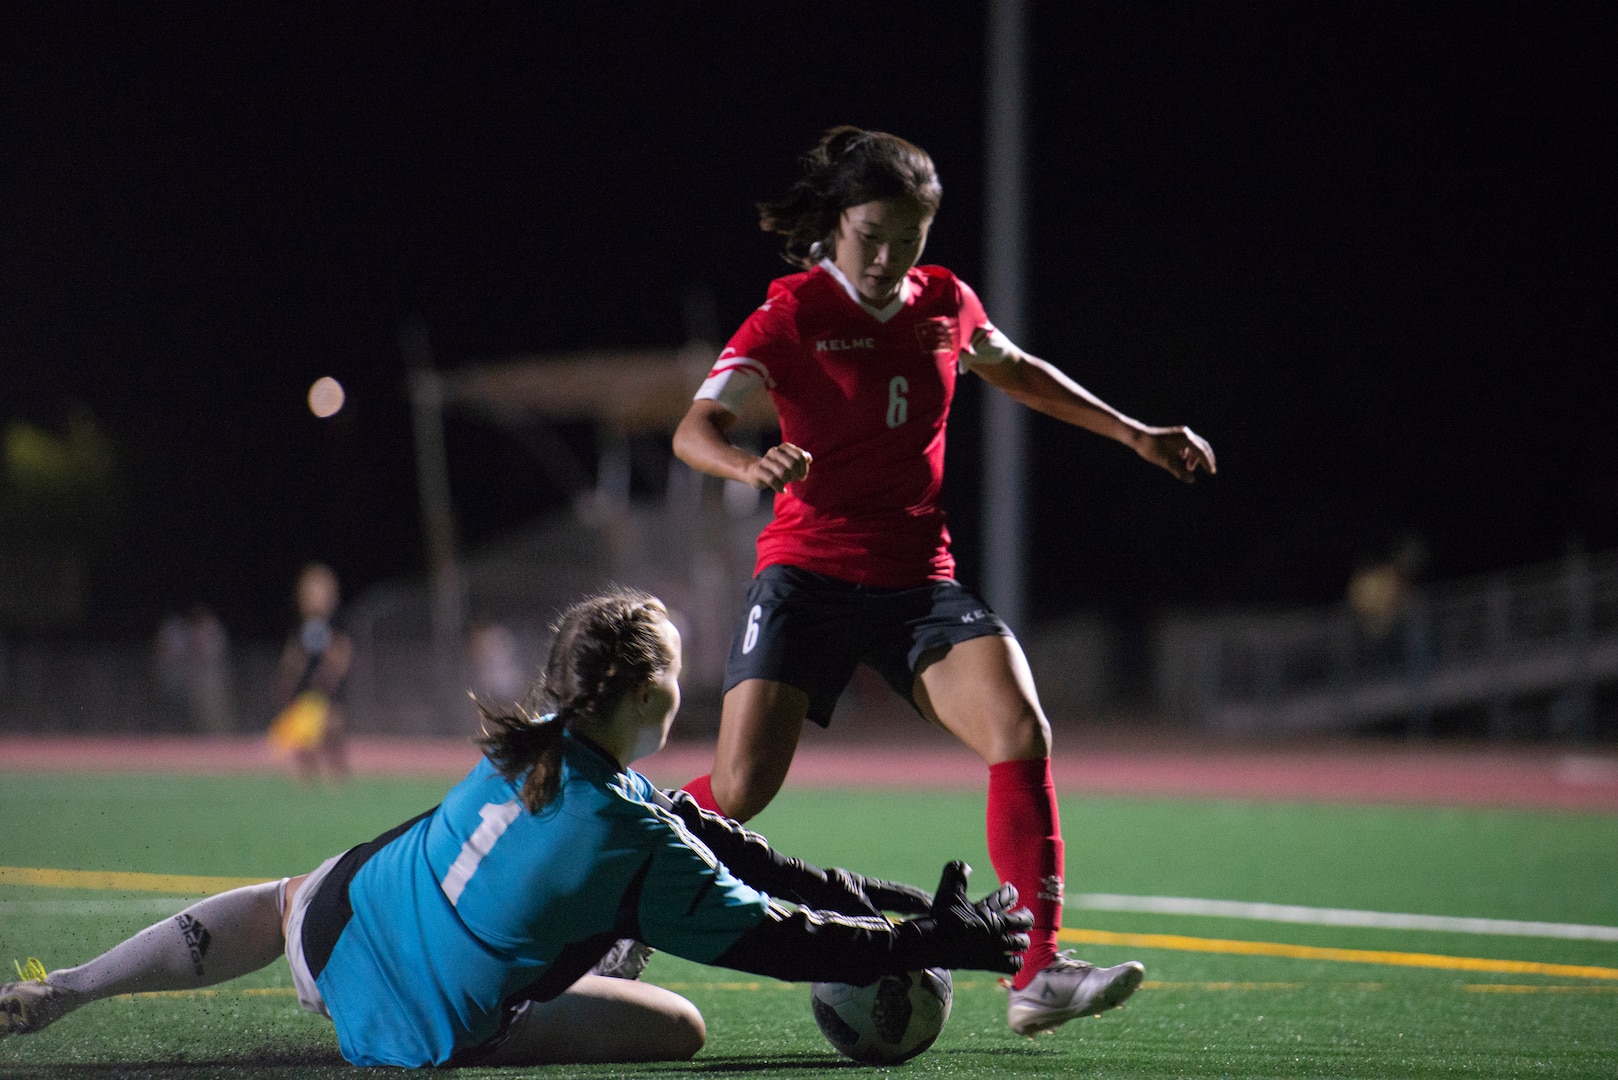 International military teams squared off to eventually crown the best women soccer players among the international militaries participating. U.S. Navy photo by